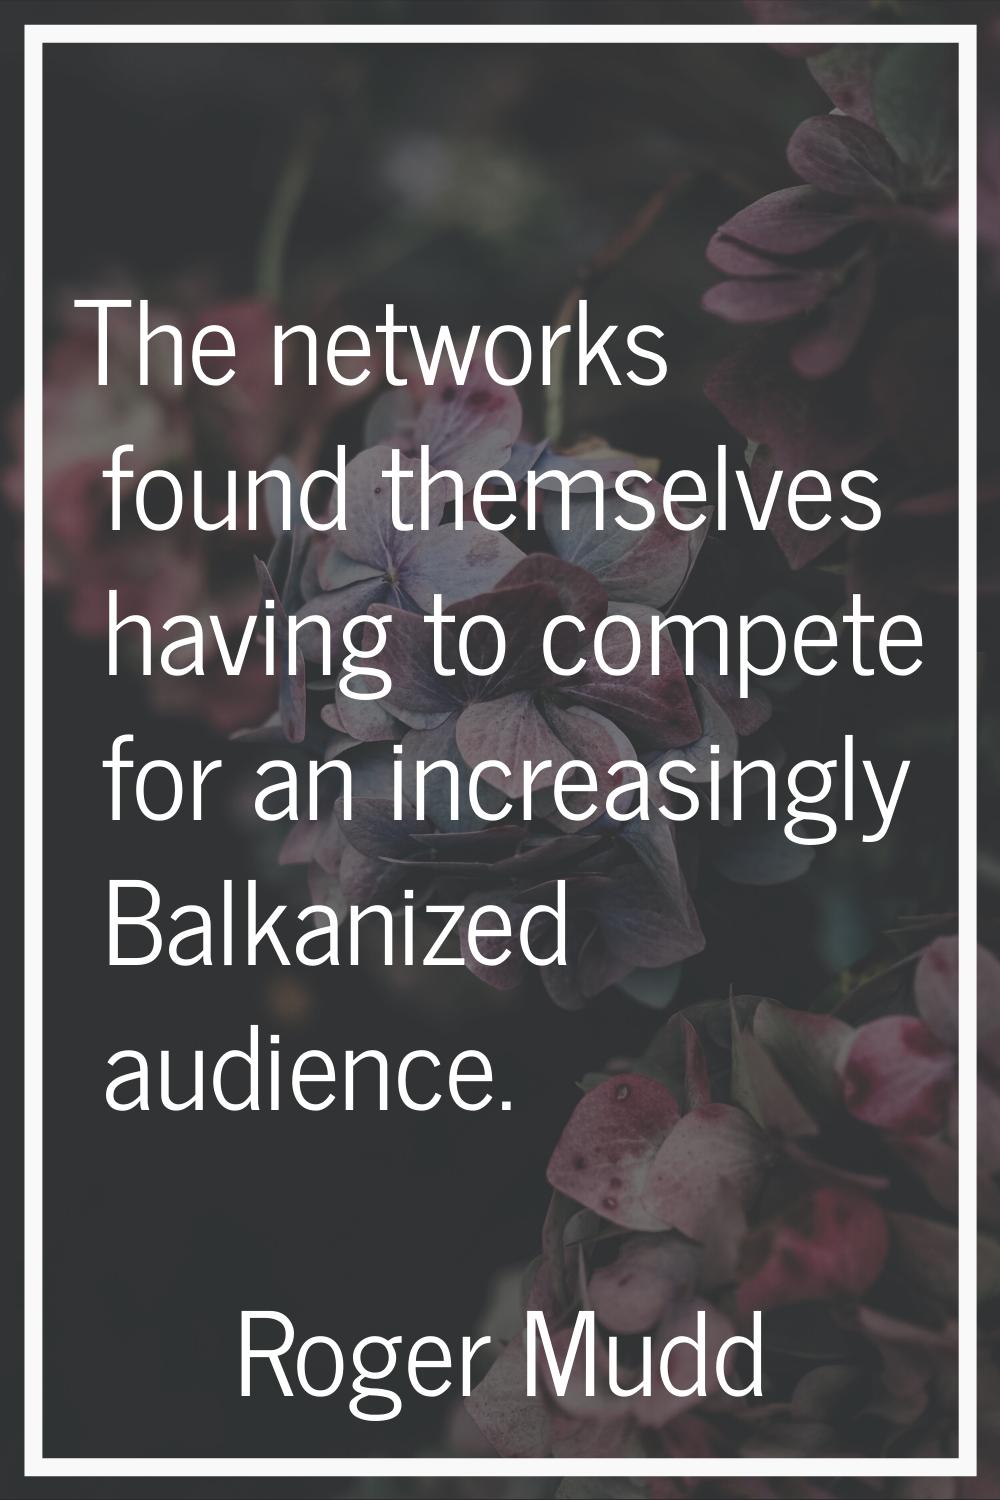 The networks found themselves having to compete for an increasingly Balkanized audience.